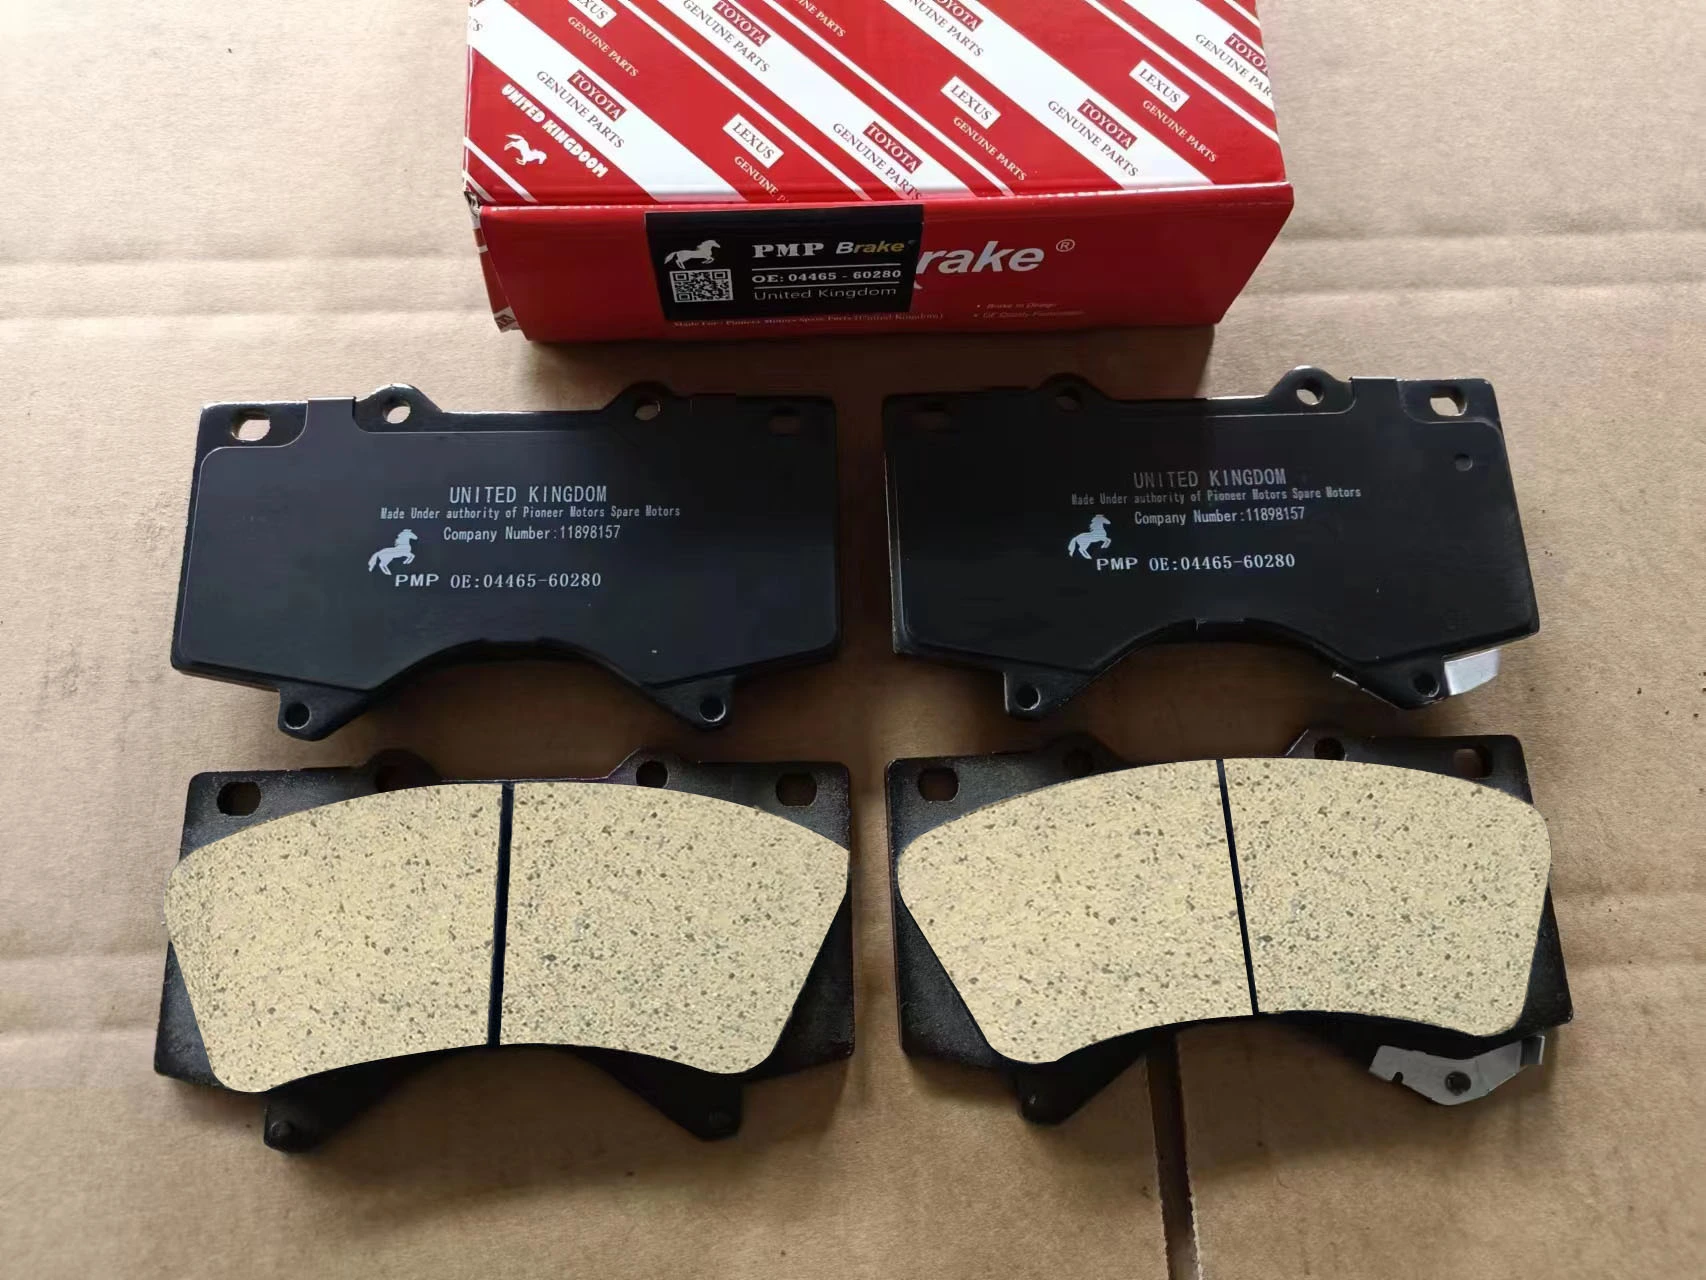 Reliable semi metallic brake pads specifically made for Toyota Corolla, ensuring safety on the road.